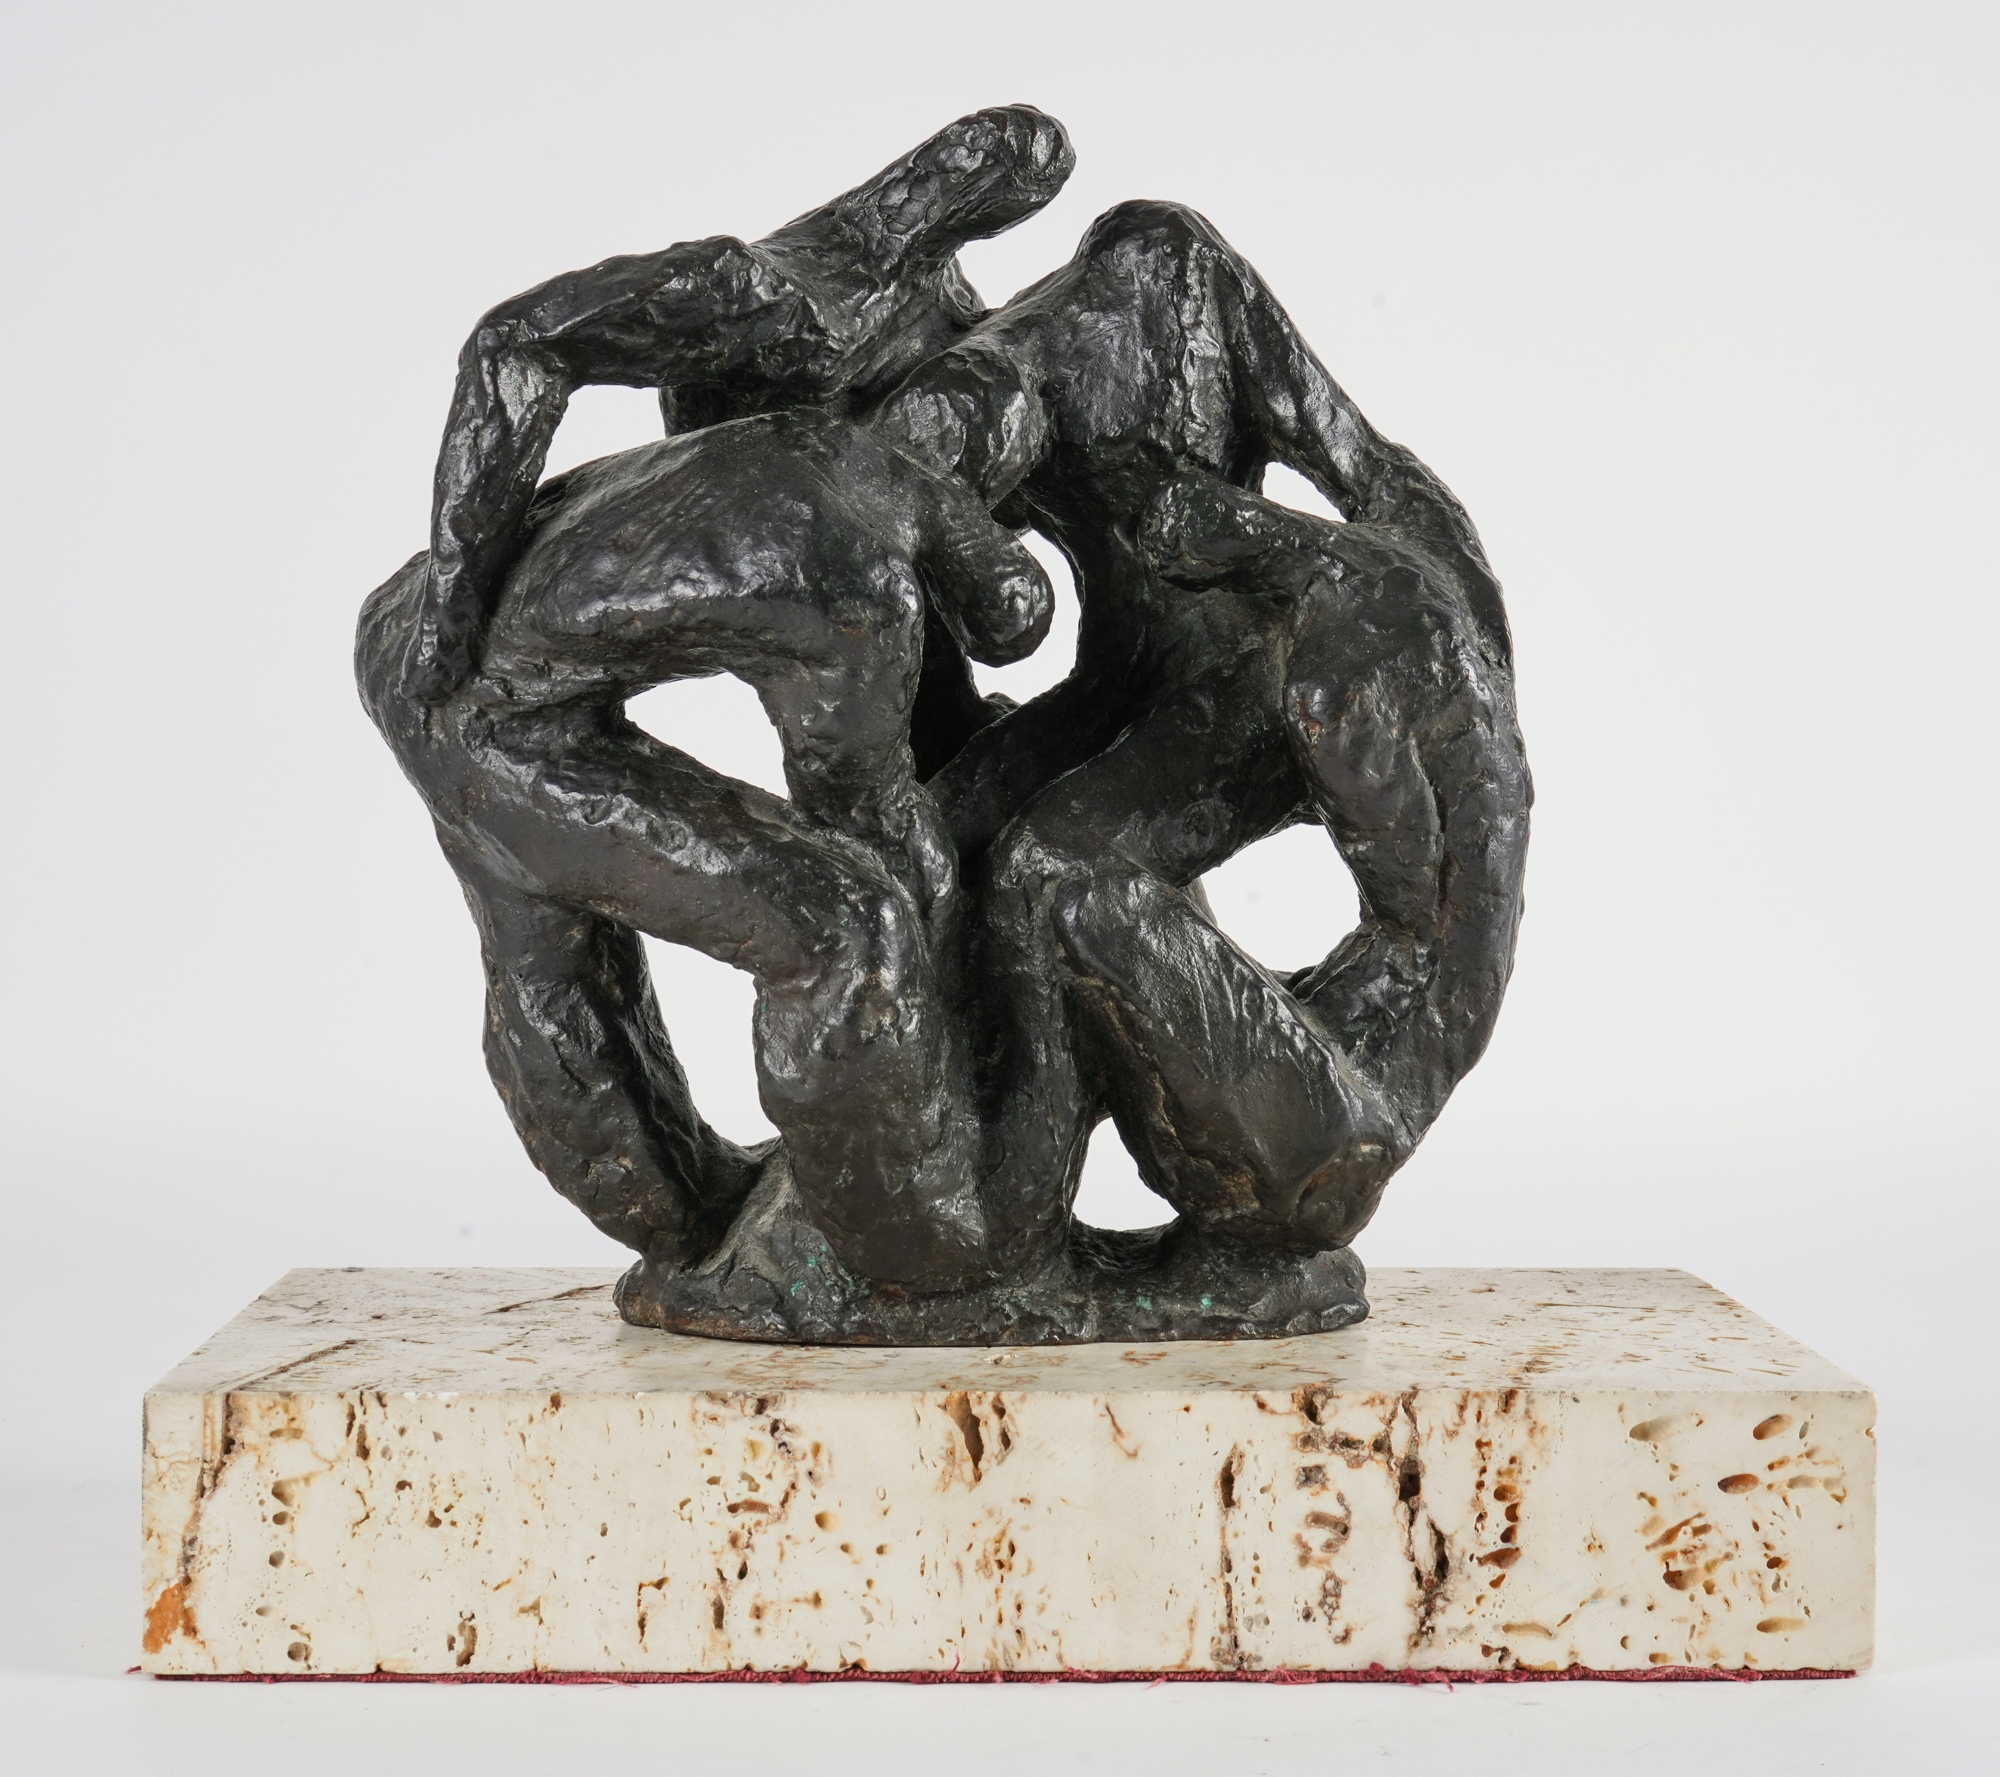 Artwork by Wessel Couzijn, Struggle, Made of bronze